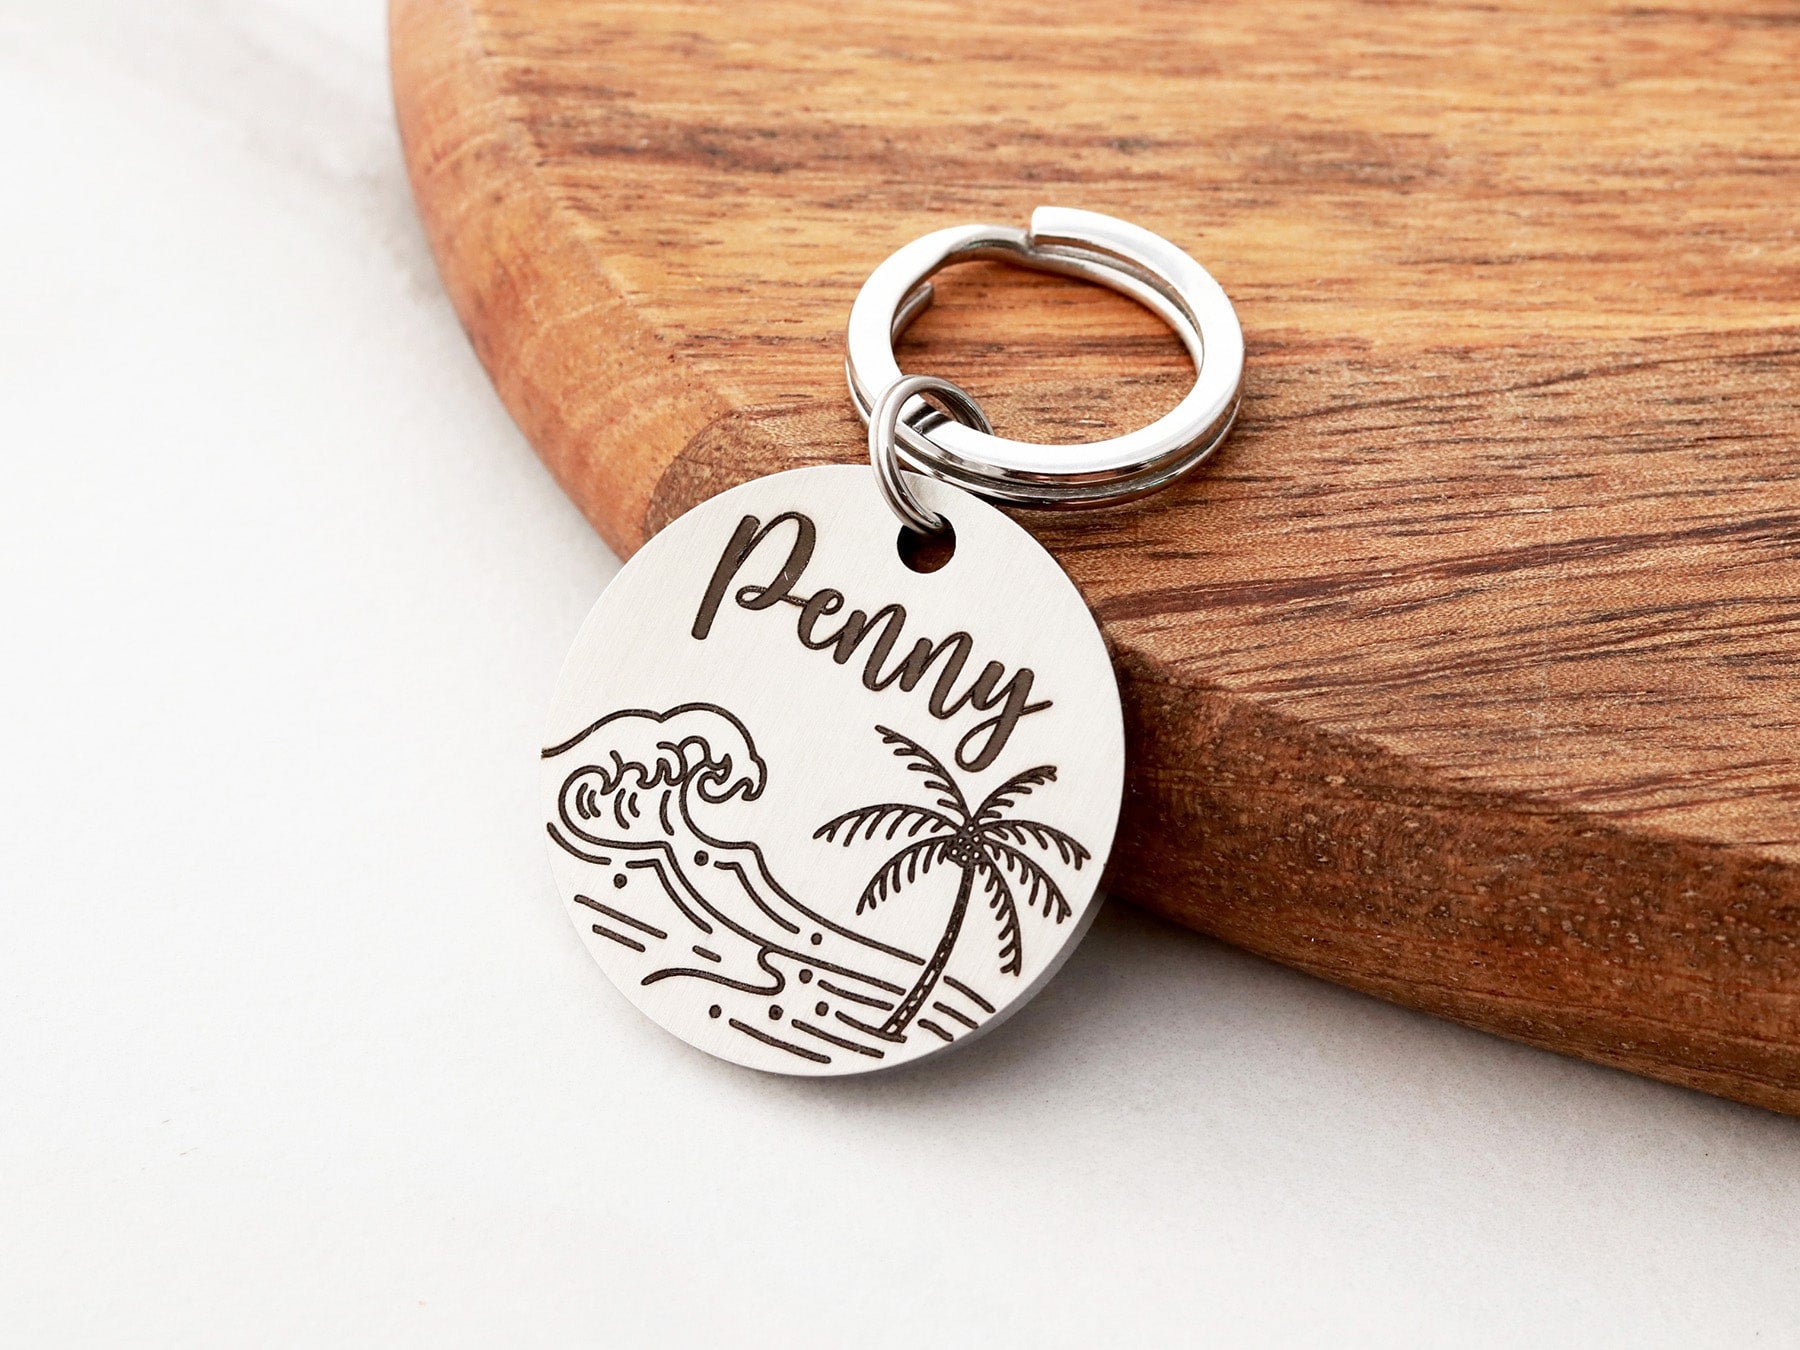 Lucky Tags, custom dog tags, engraved tags, beach tags, personalized tags, pet tags, collar tags